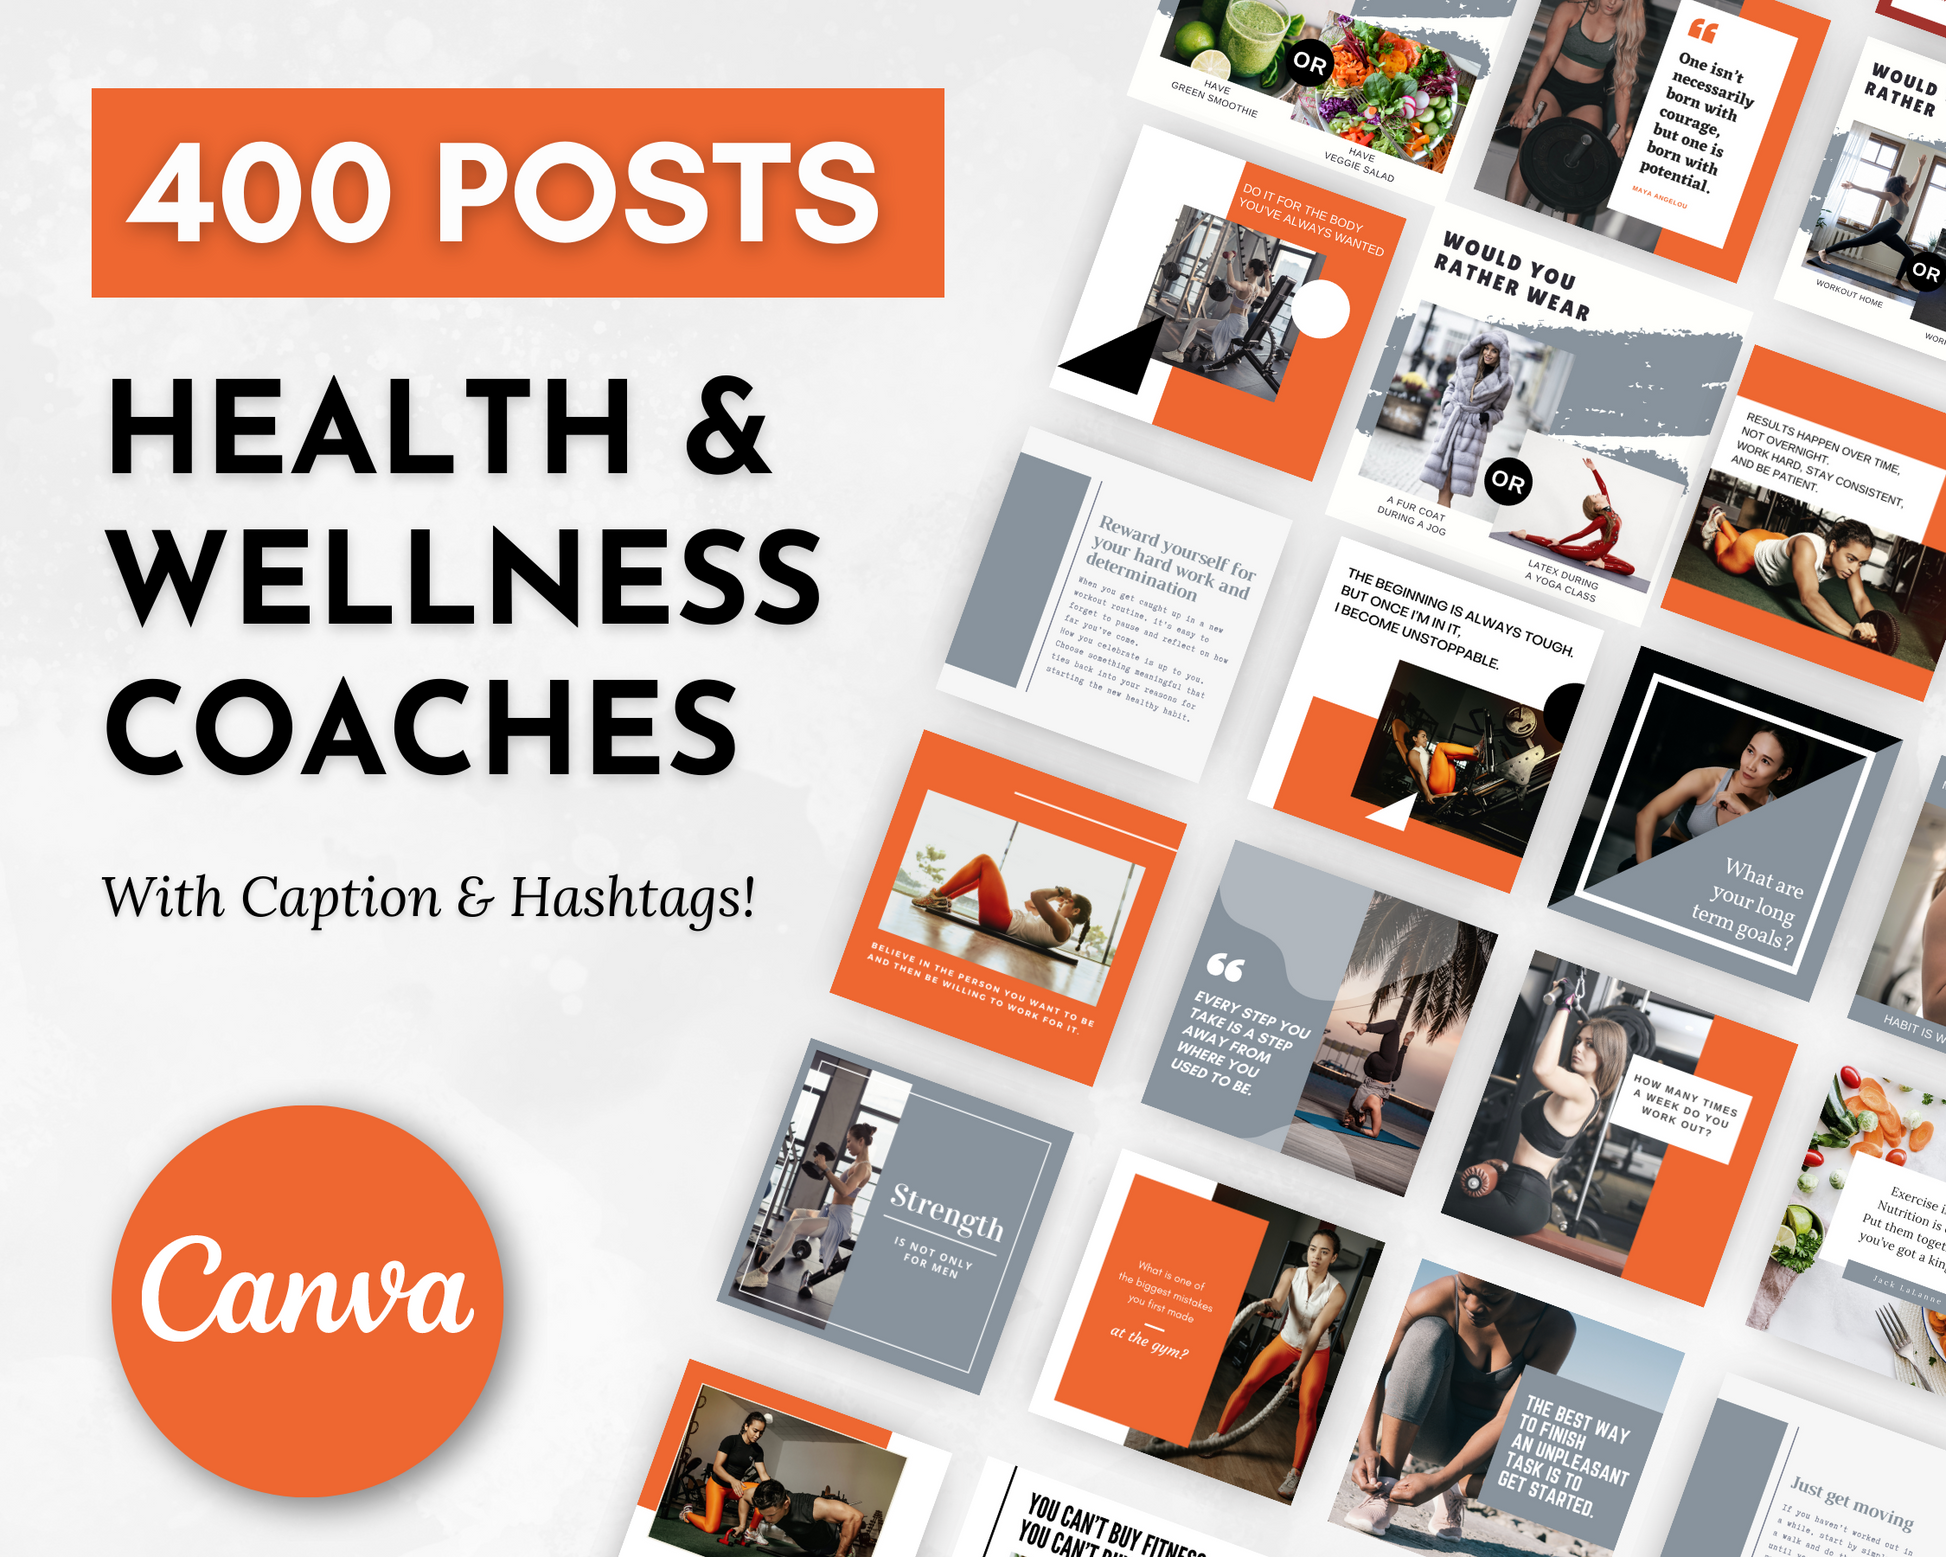 400 Health & Wellness Coaches Social Media Posts with Canva Templates, by Socially Inclined.